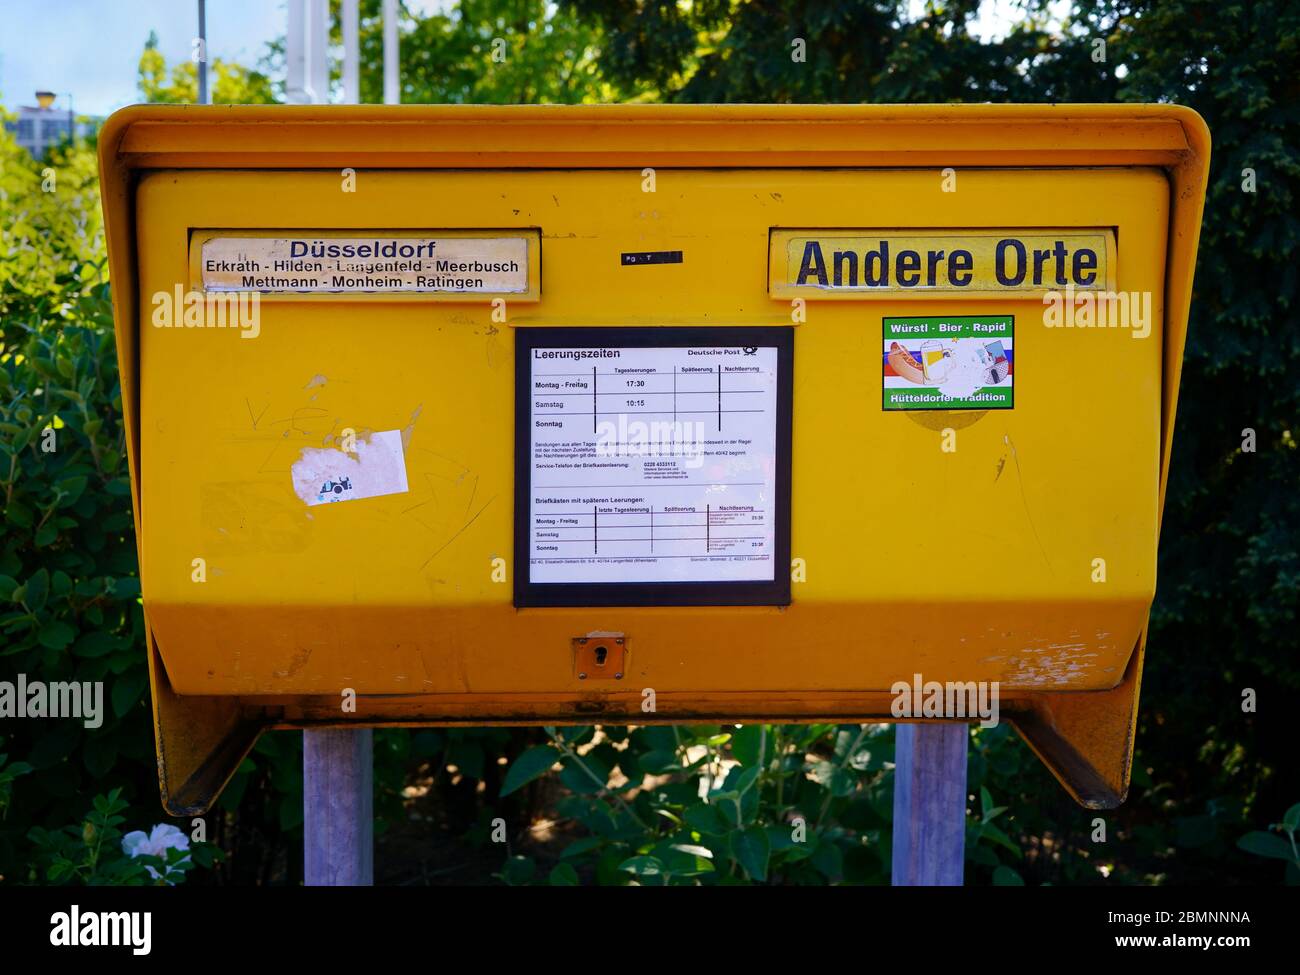 Yellow public mail box (German: 'Briefkasten') made of steel plate. This one is for the Düsseldorf region. 'Andere Orte' means 'other destinations'. Stock Photo